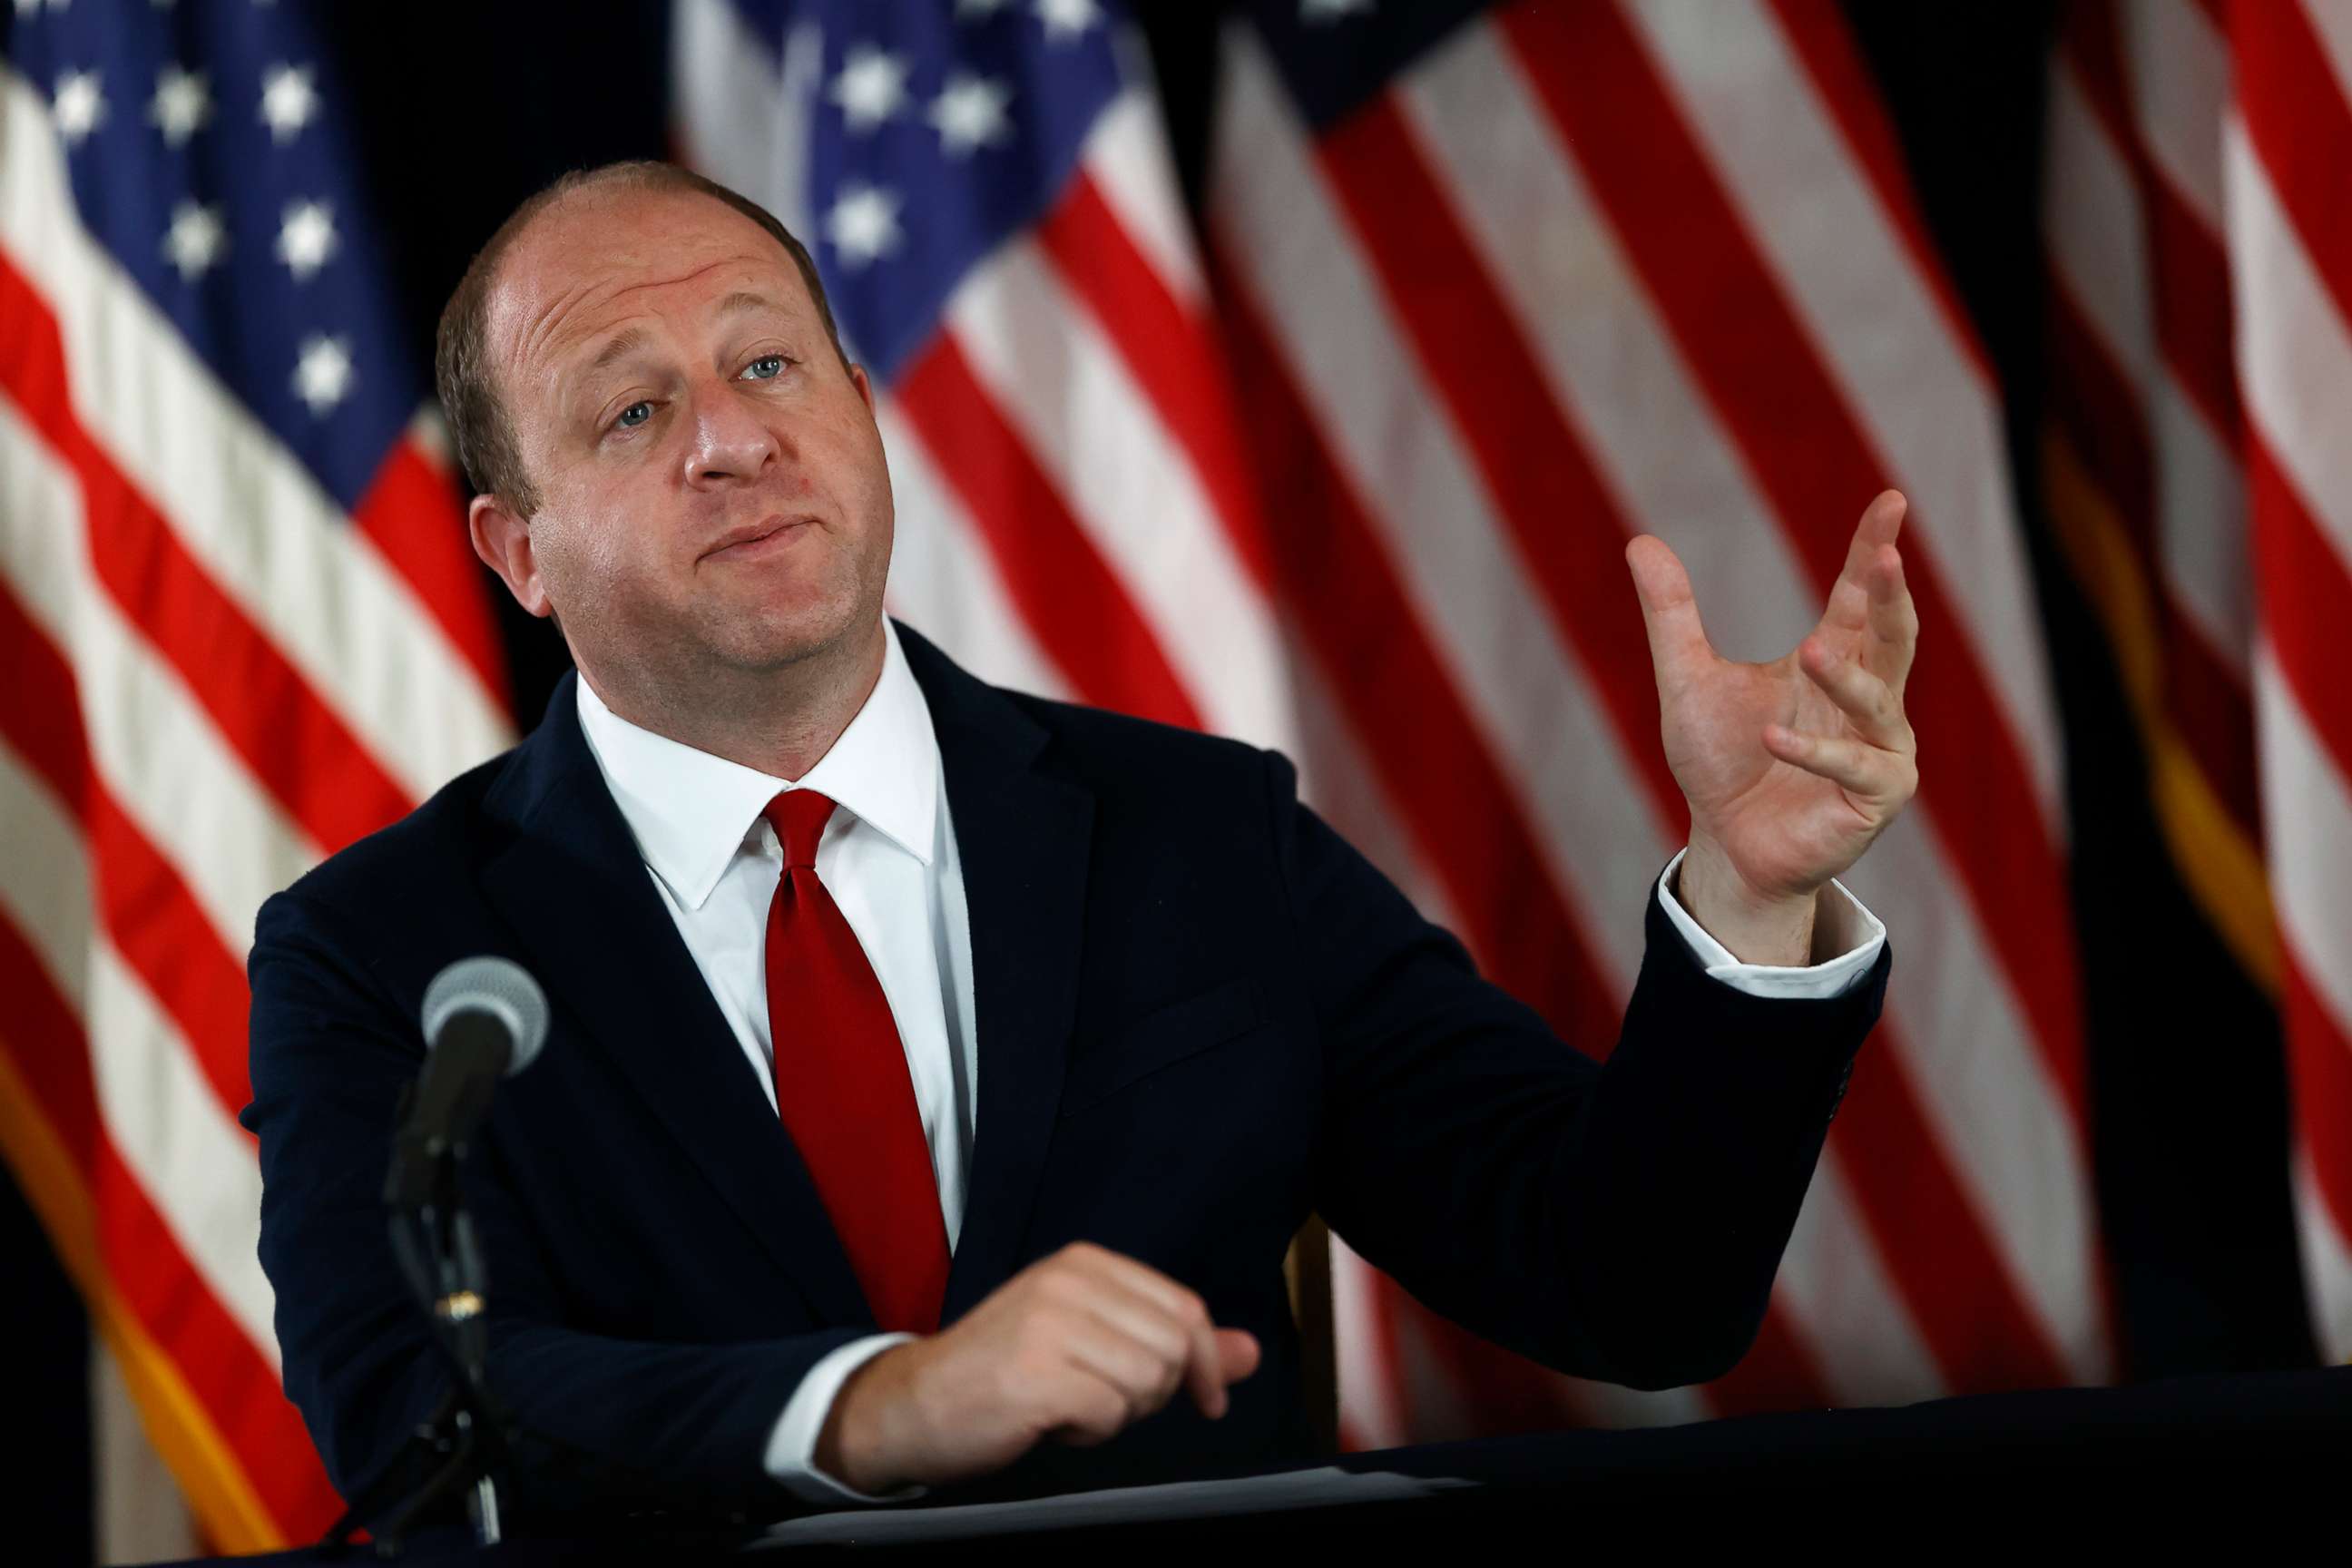 PHOTO: Colorado Governor Jared Polis makes a point during a news conference on the state's efforts to contain the spread of the new coronavirus, July 9, 2020, in Denver.